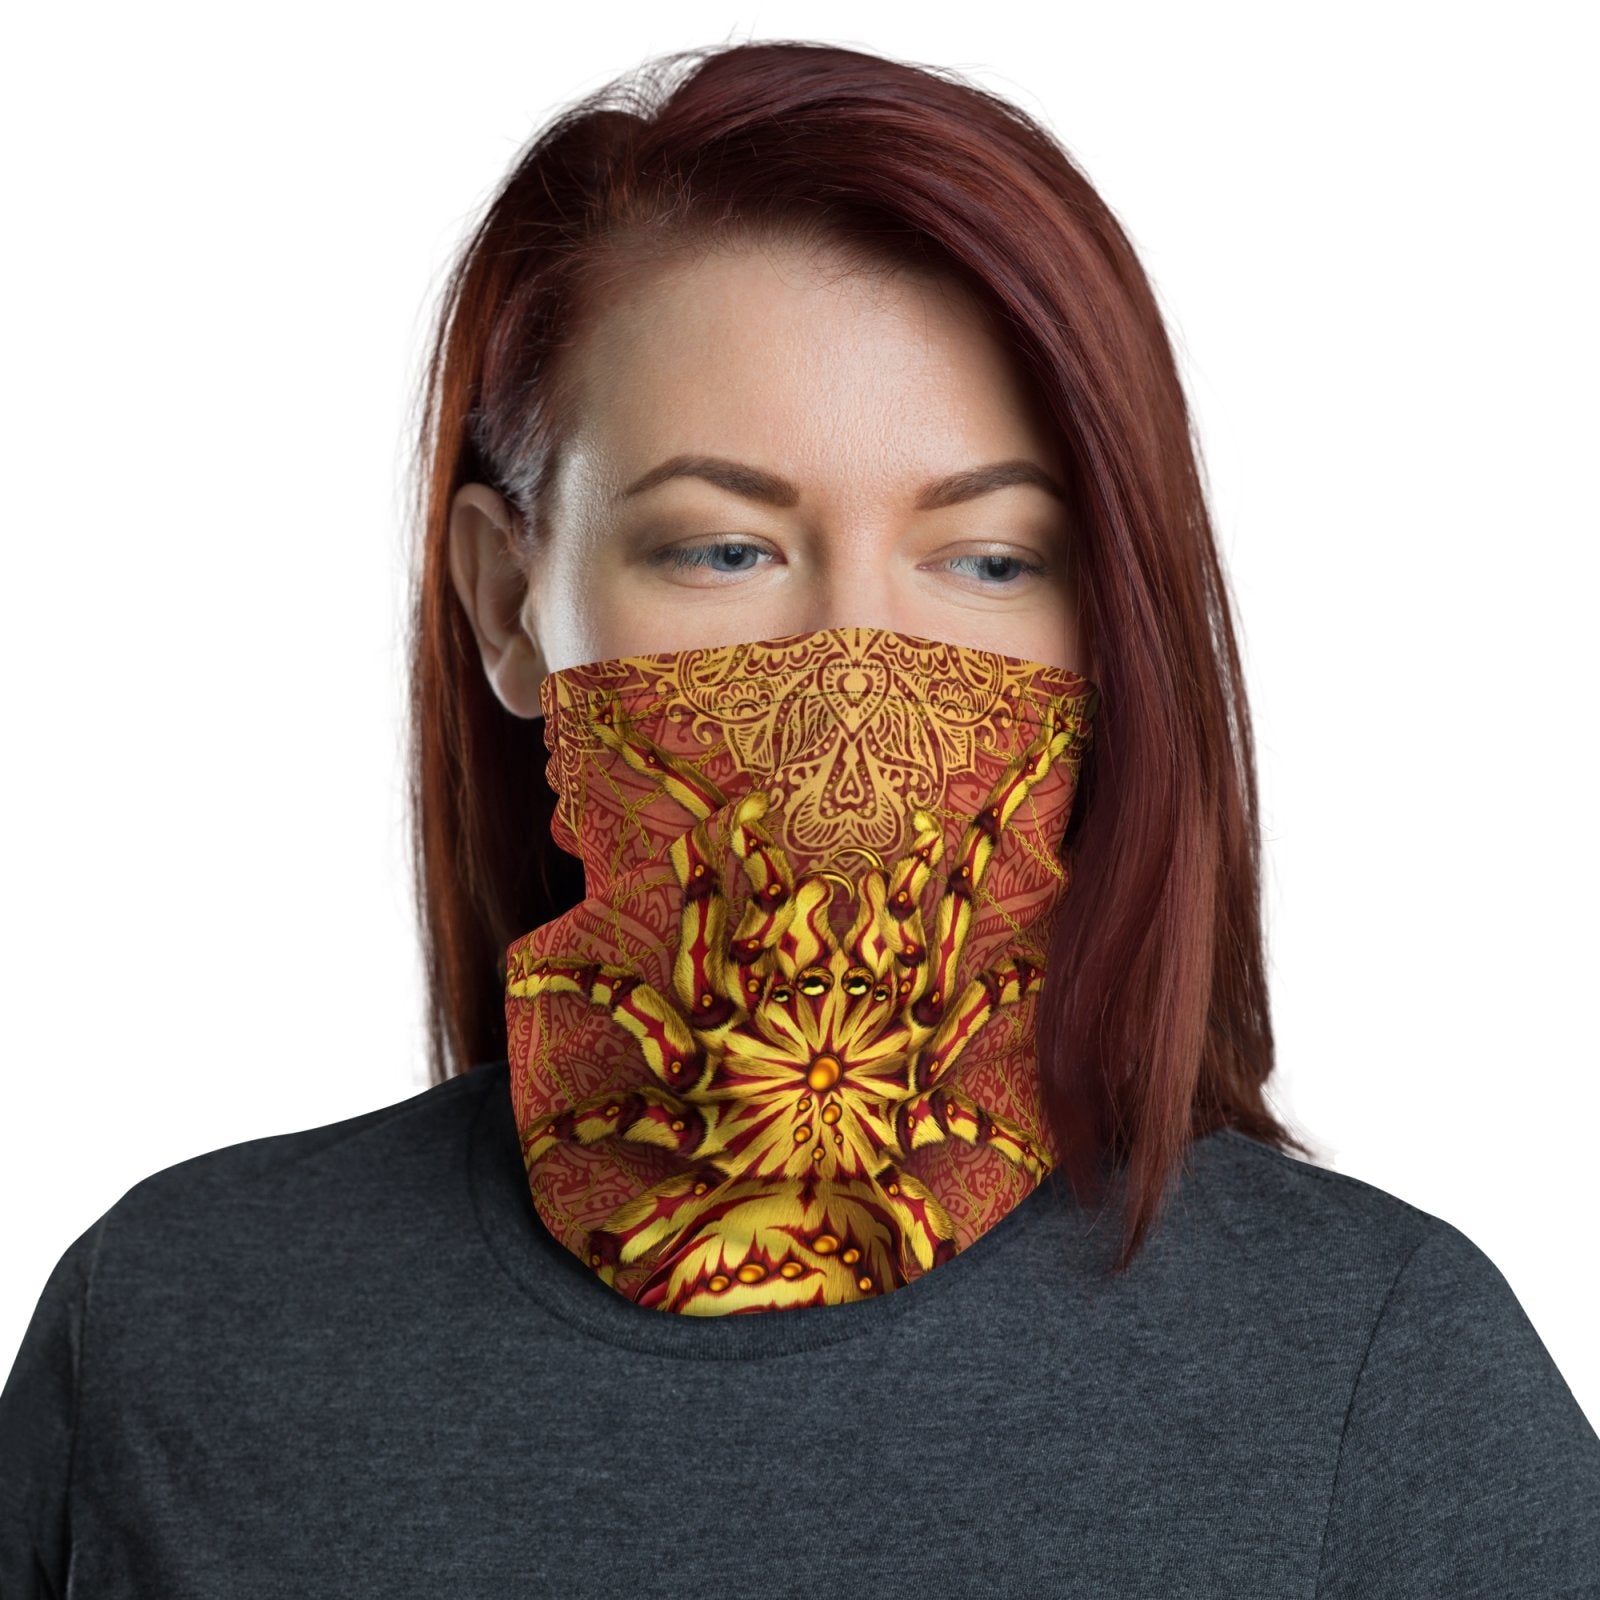 Boho Neck Gaiter, Face Mask, Head Covering, Indie Festival Outfit, Tarantula Lover Gift - Spider - Abysm Internal